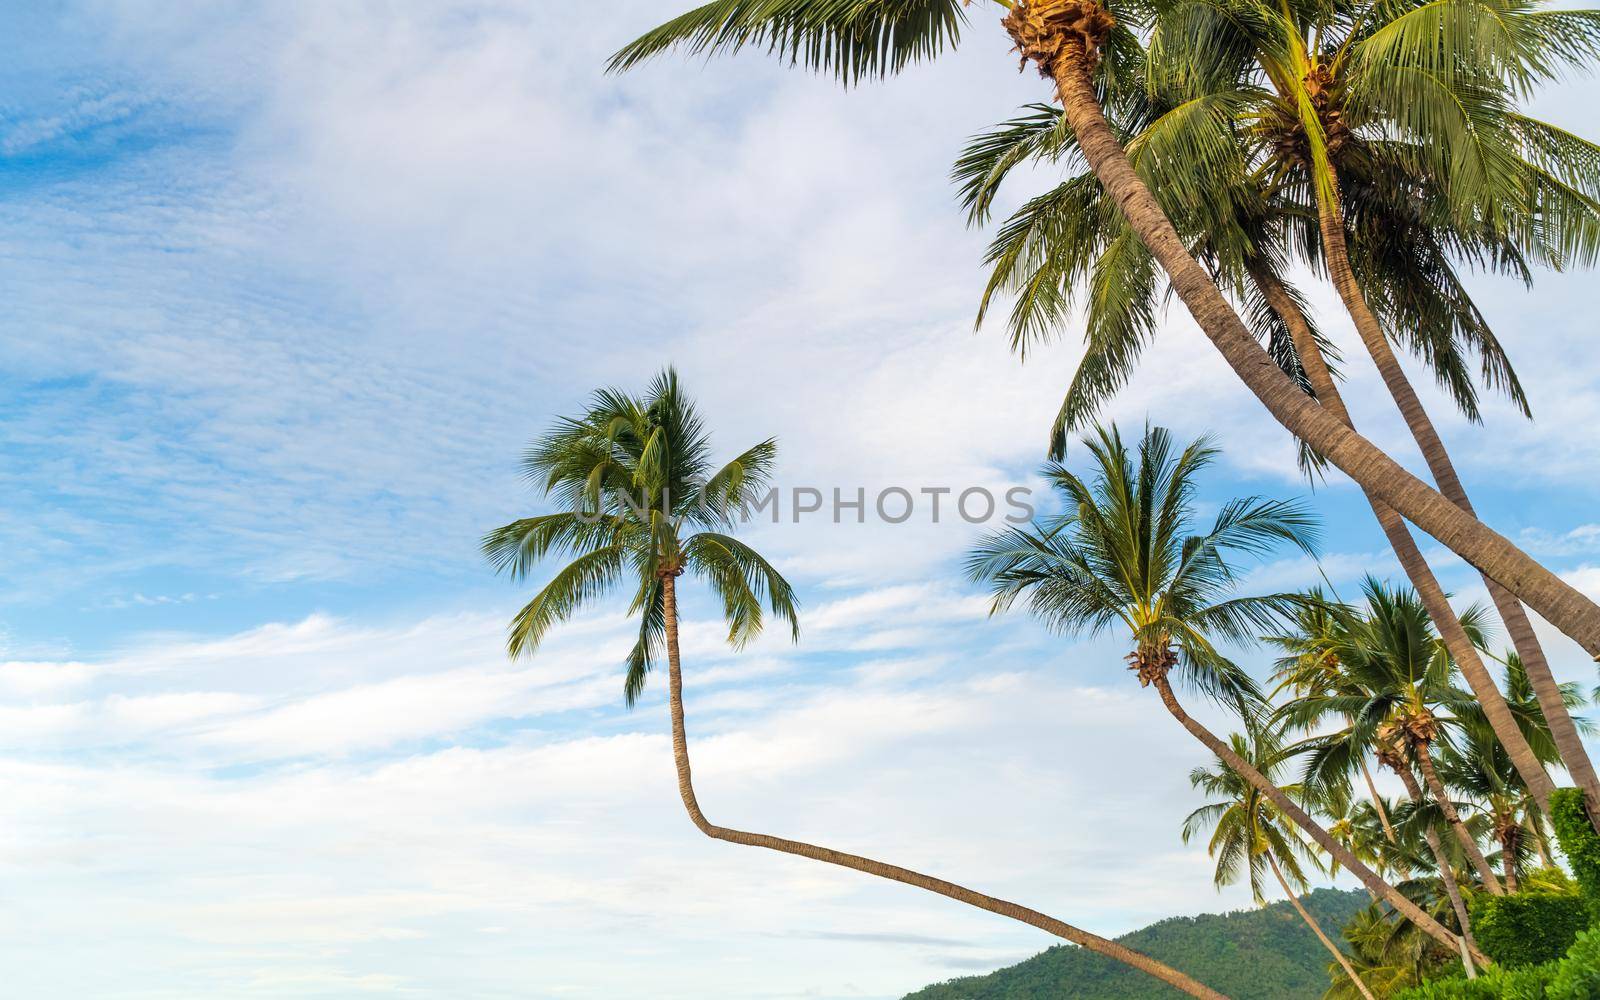 Tropical beach with coconut trees. Koh Samui, Thailand by toa55